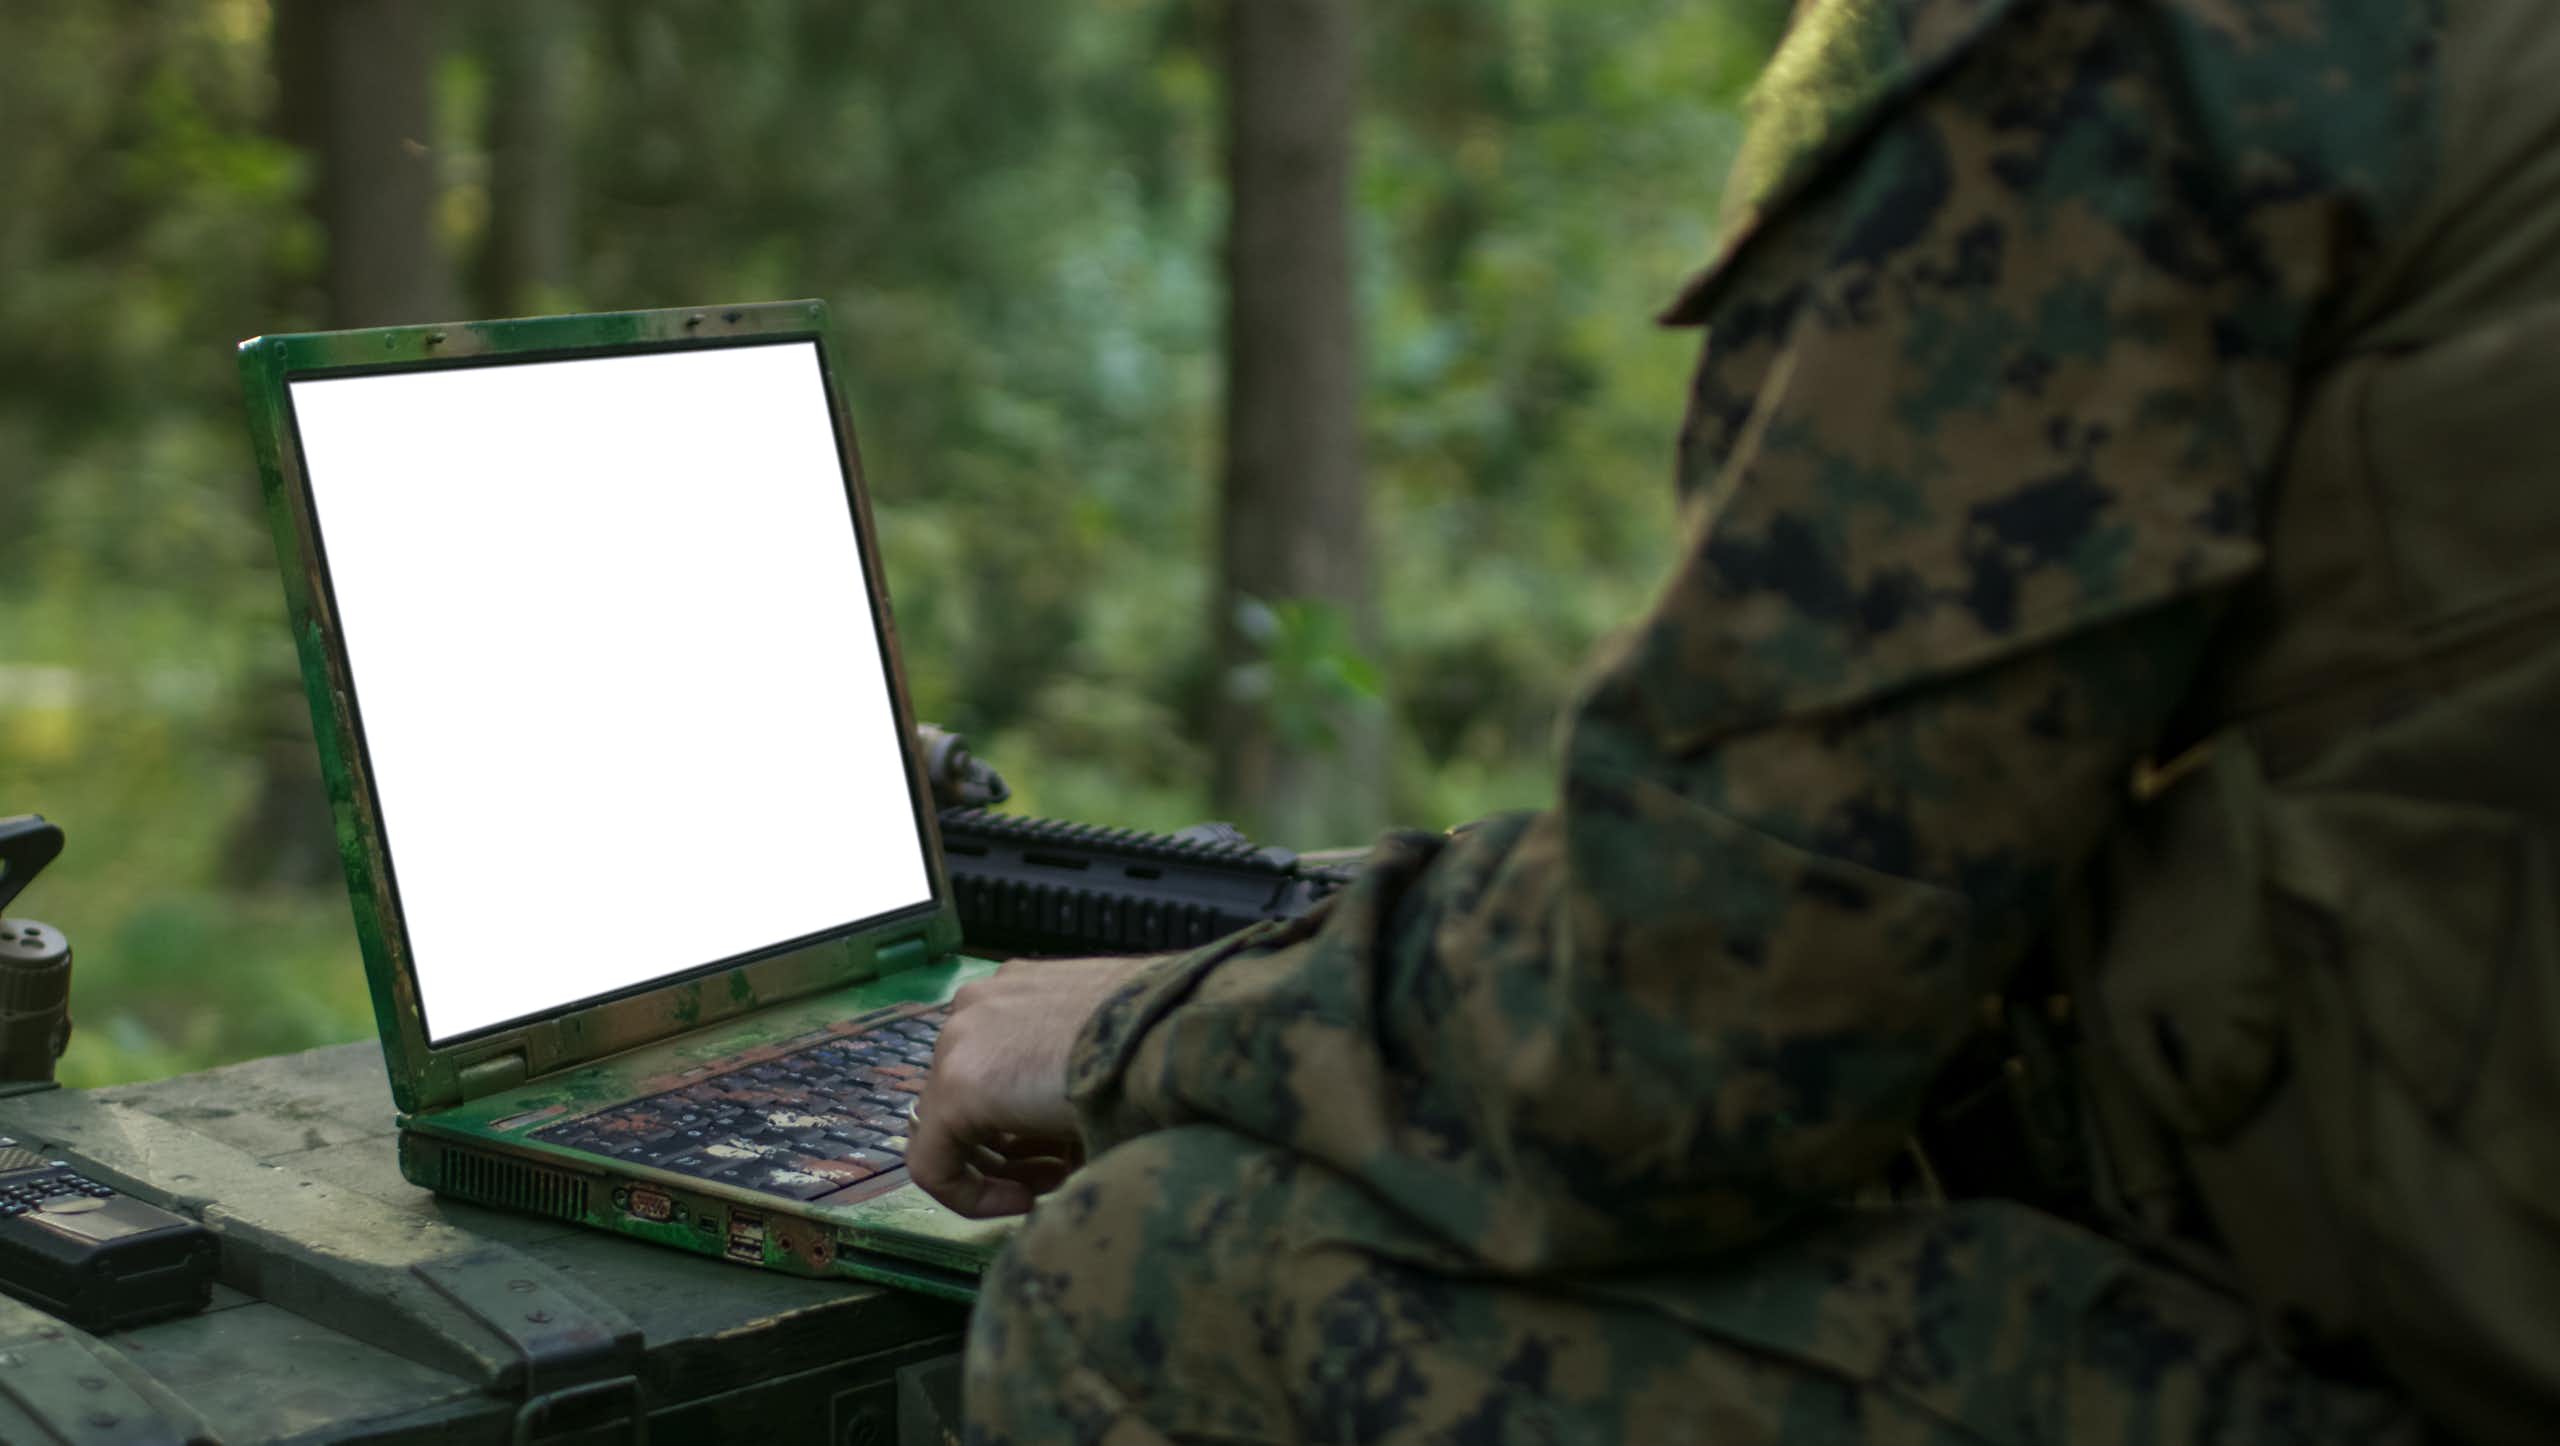 A person in camouflage clothing looks at a blank laptop screen.